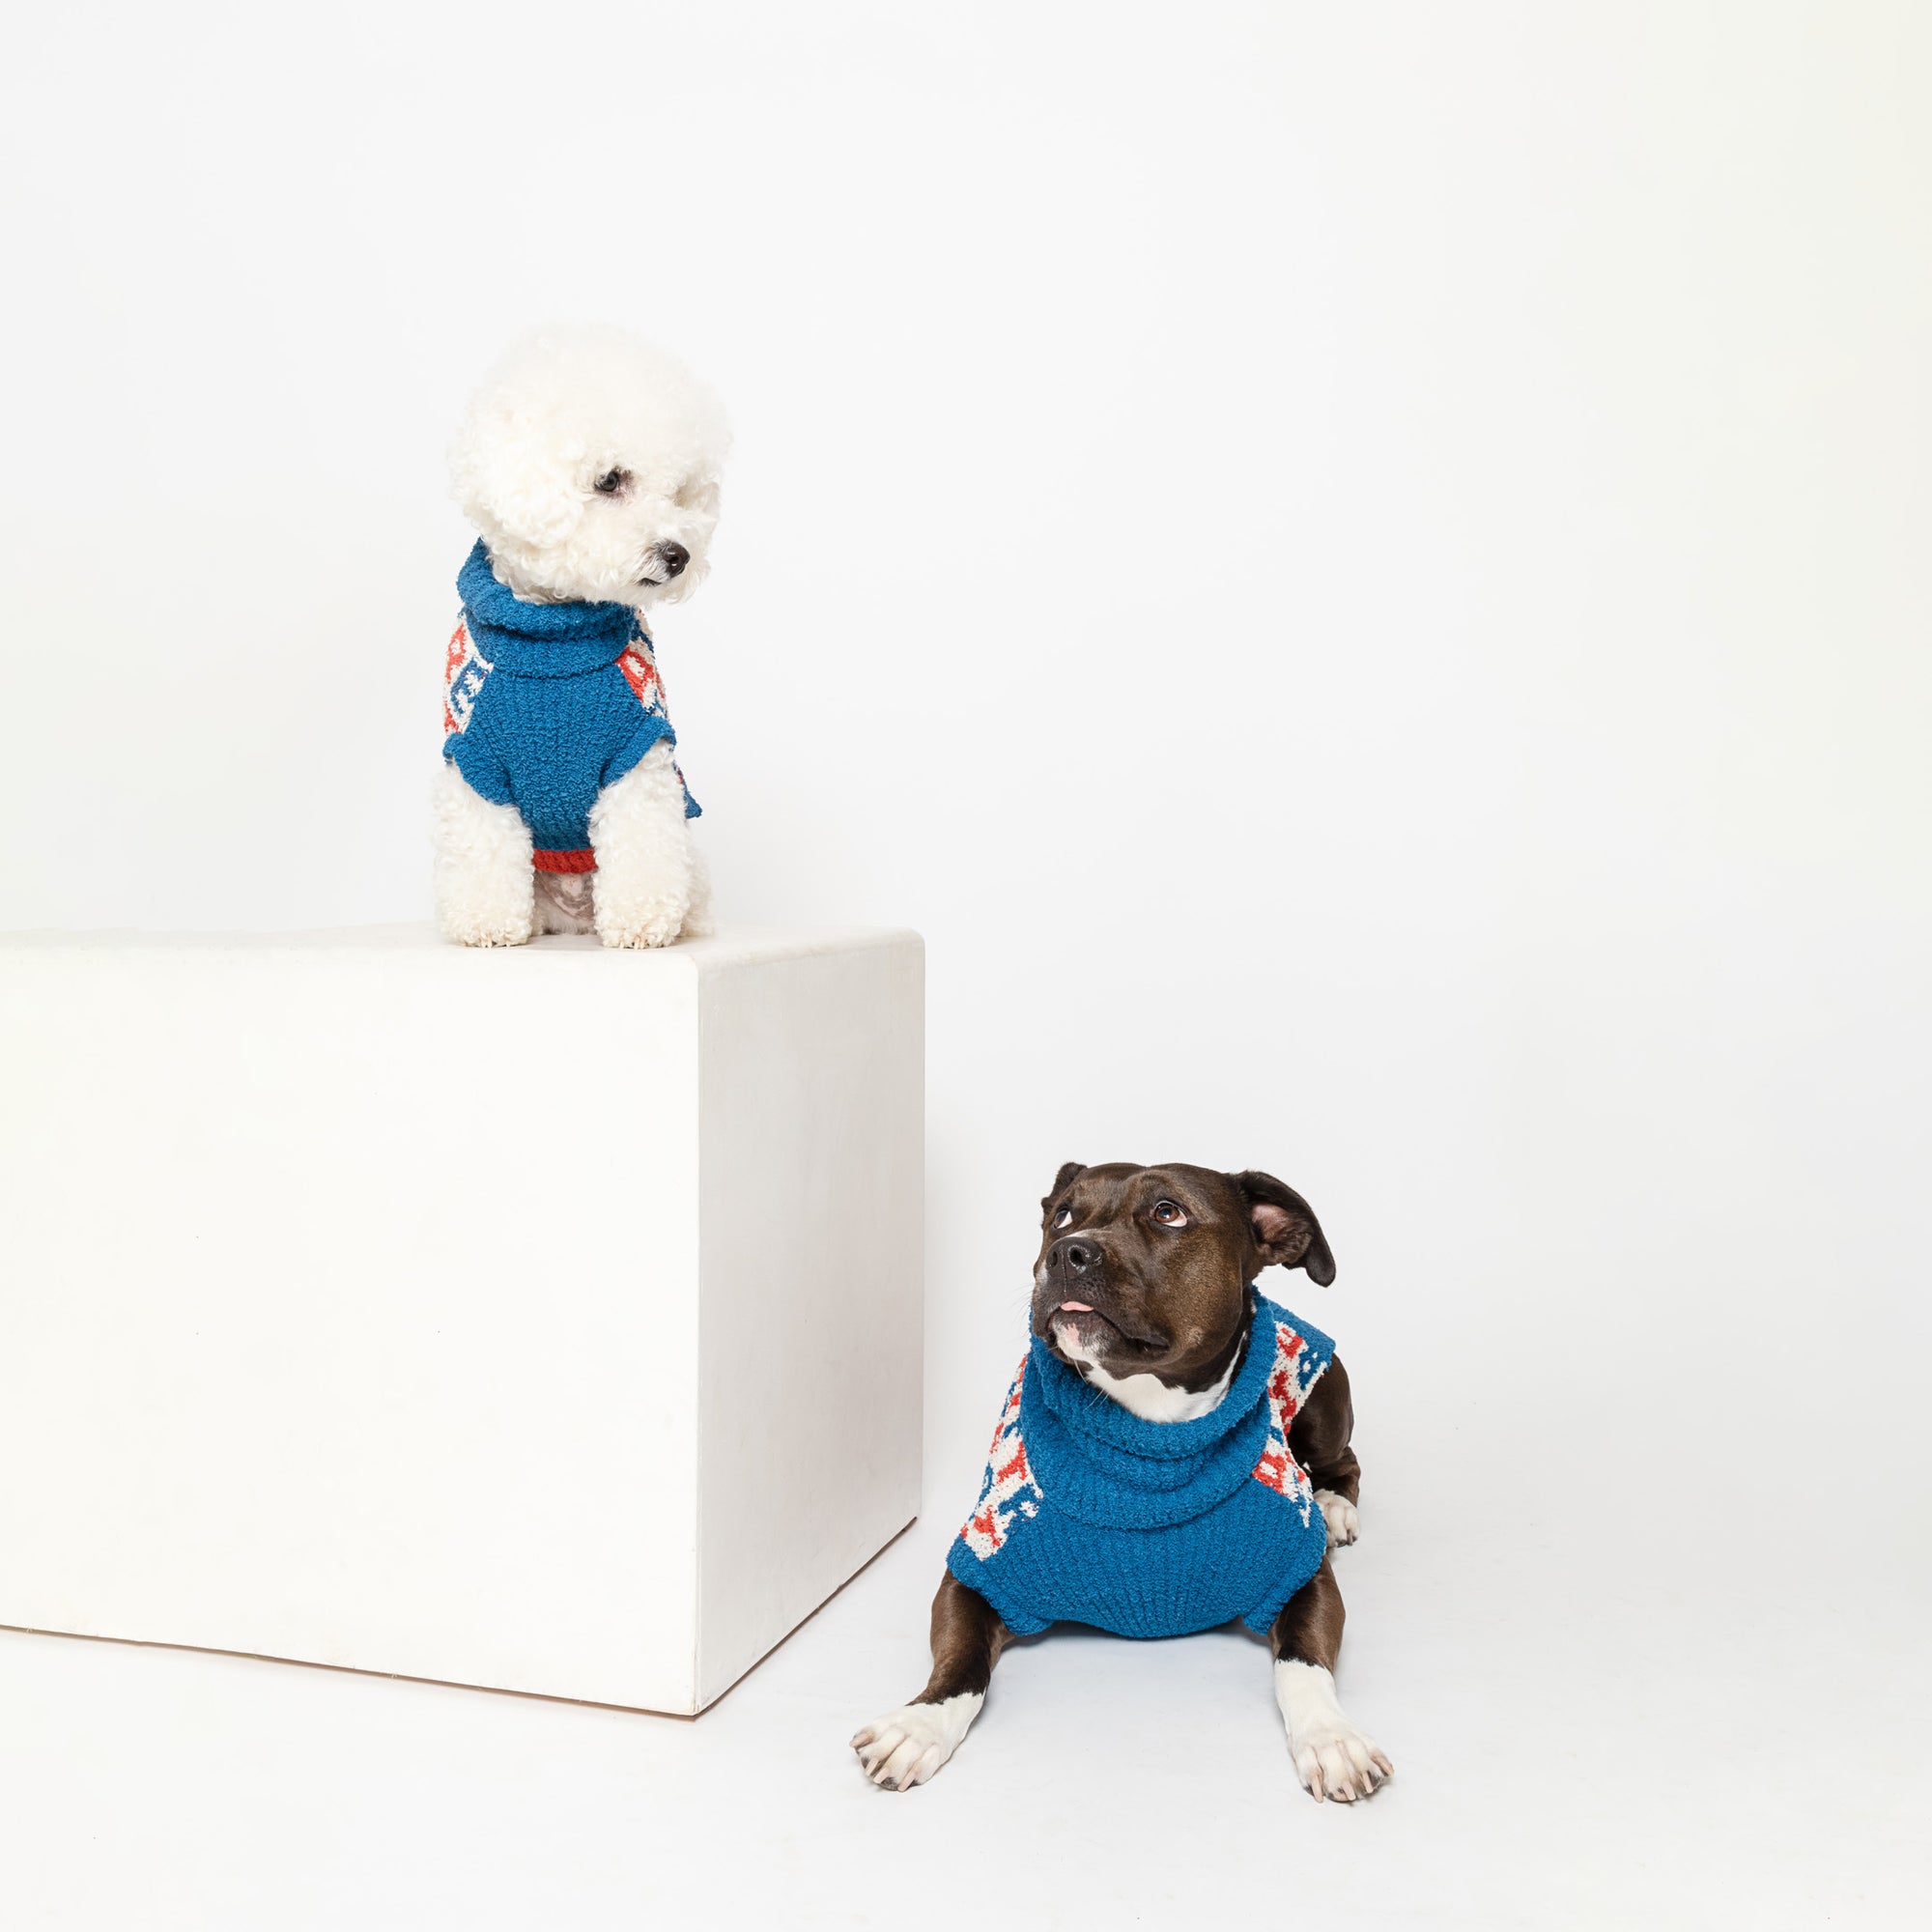  A small white dog perched on a ledge and a larger brown dog sitting on the floor both look away from the camera, each wearing blue knit sweaters with red and white "Treat" pattern.